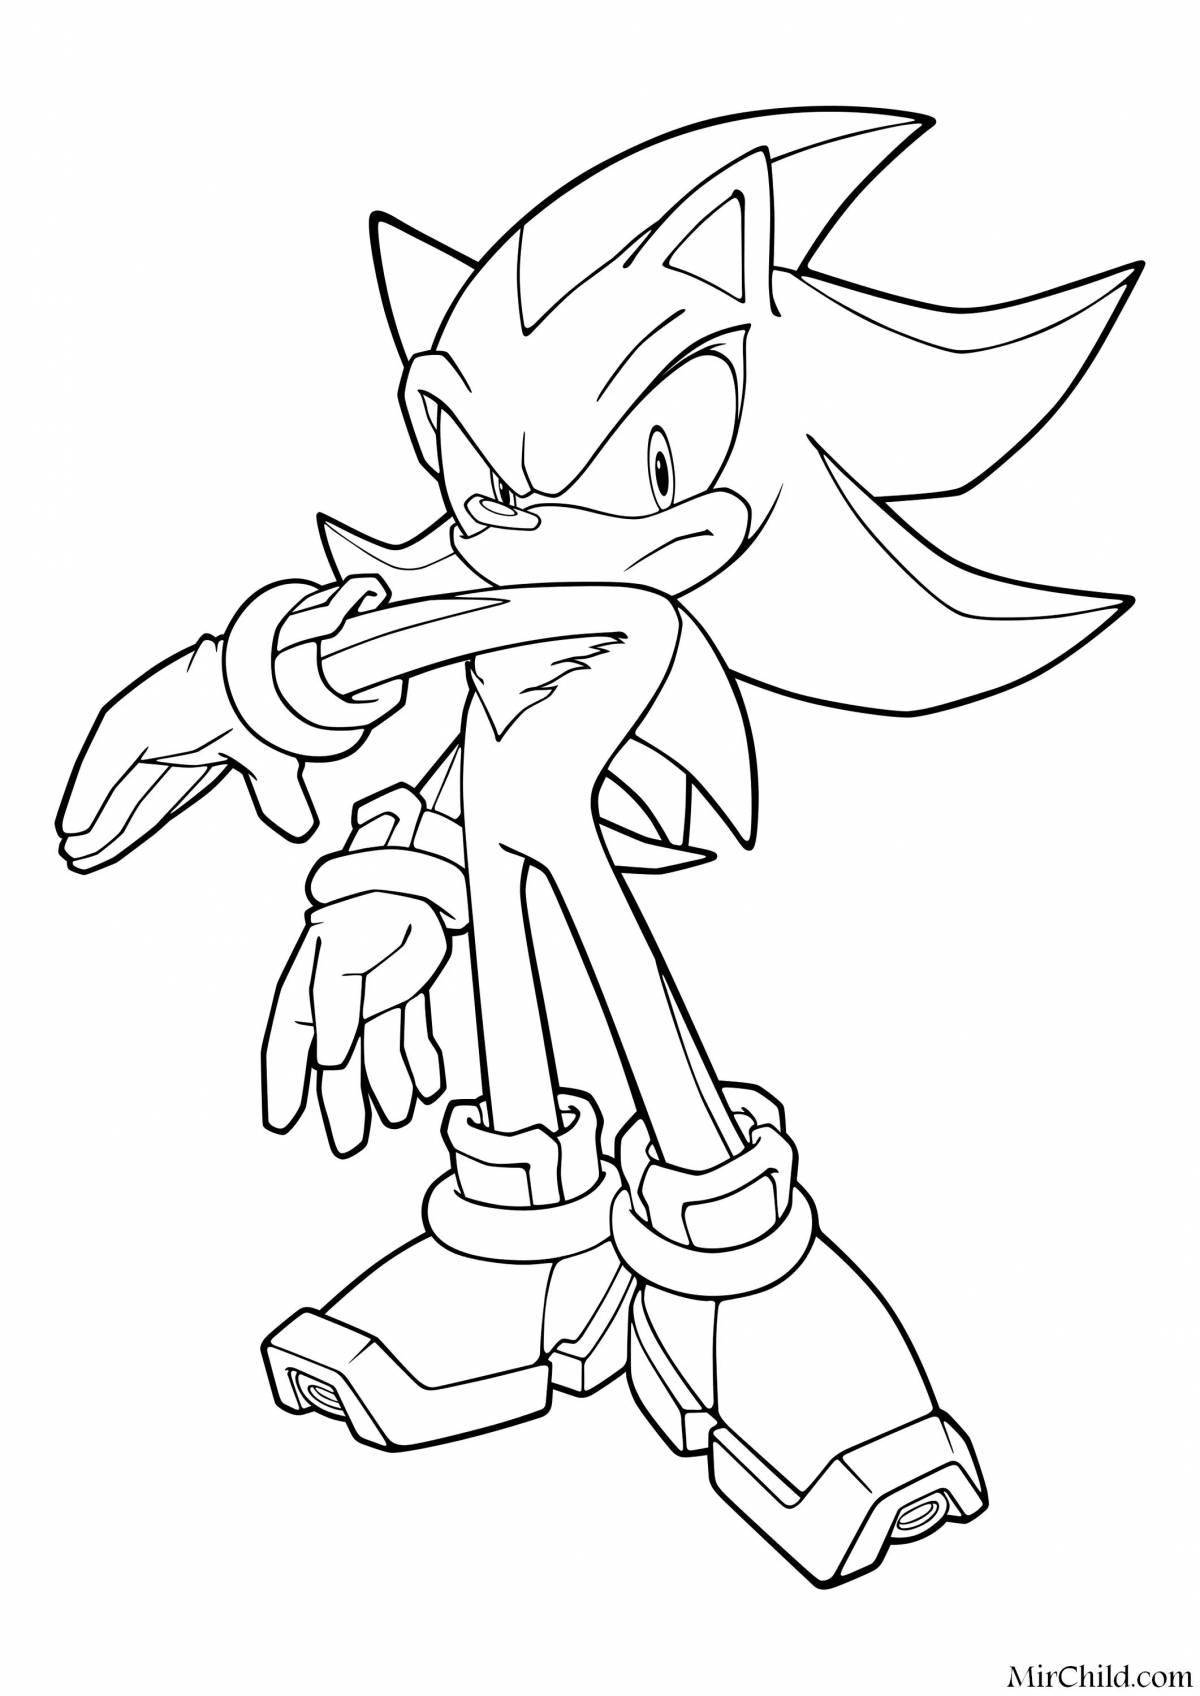 Glowing metallic shadow coloring page